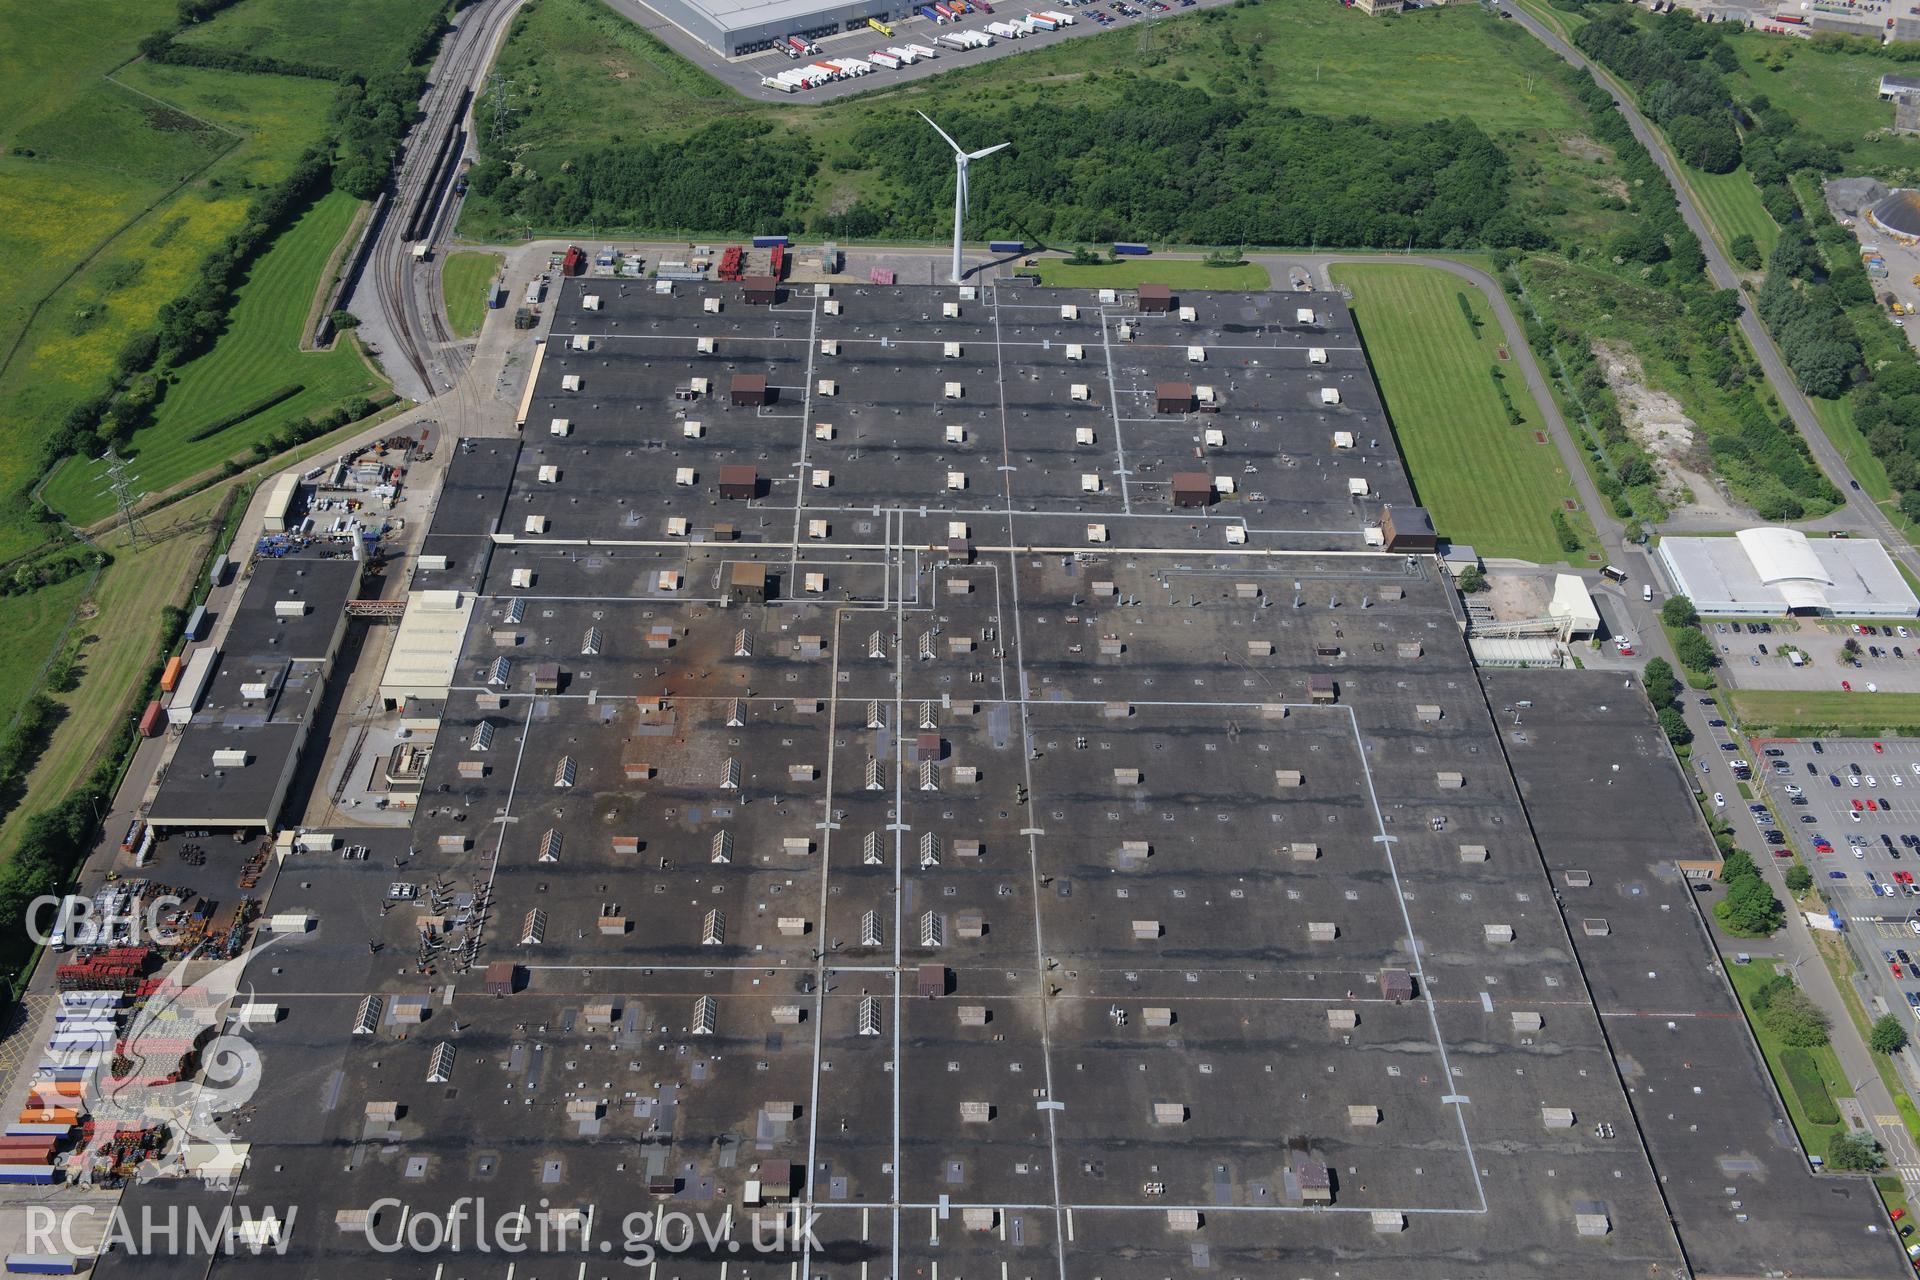 Waterton industrial estate, Bridgend. Oblique aerial photograph taken during the Royal Commission's programme of archaeological aerial reconnaissance by Toby Driver on 19th June 2015.